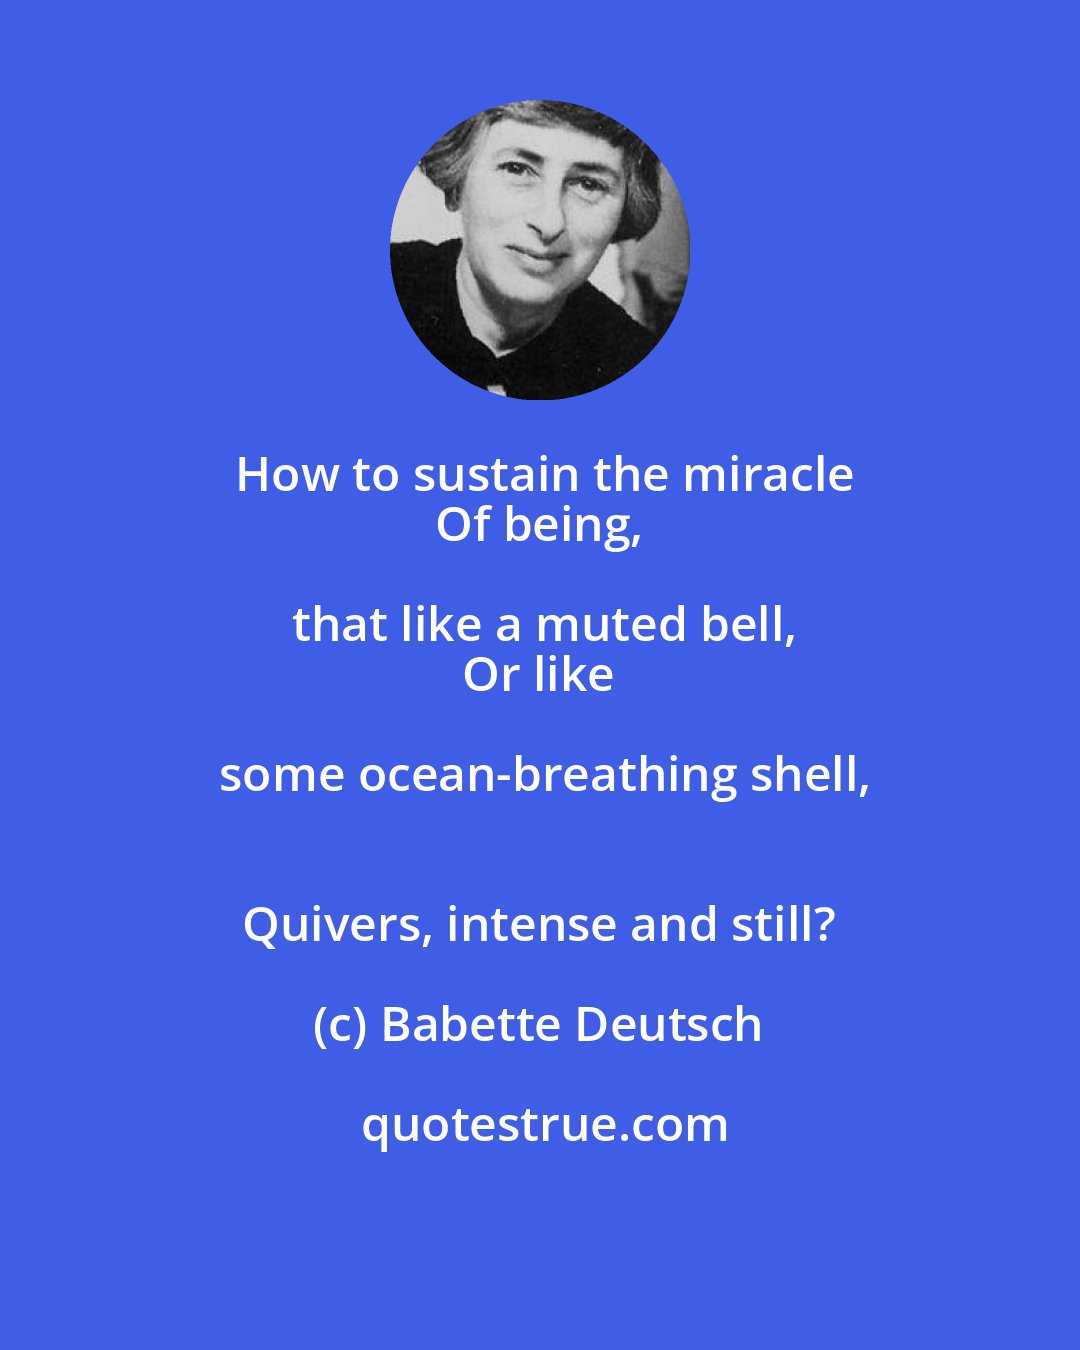 Babette Deutsch: How to sustain the miracle
 Of being, that like a muted bell,
 Or like some ocean-breathing shell,
 Quivers, intense and still?